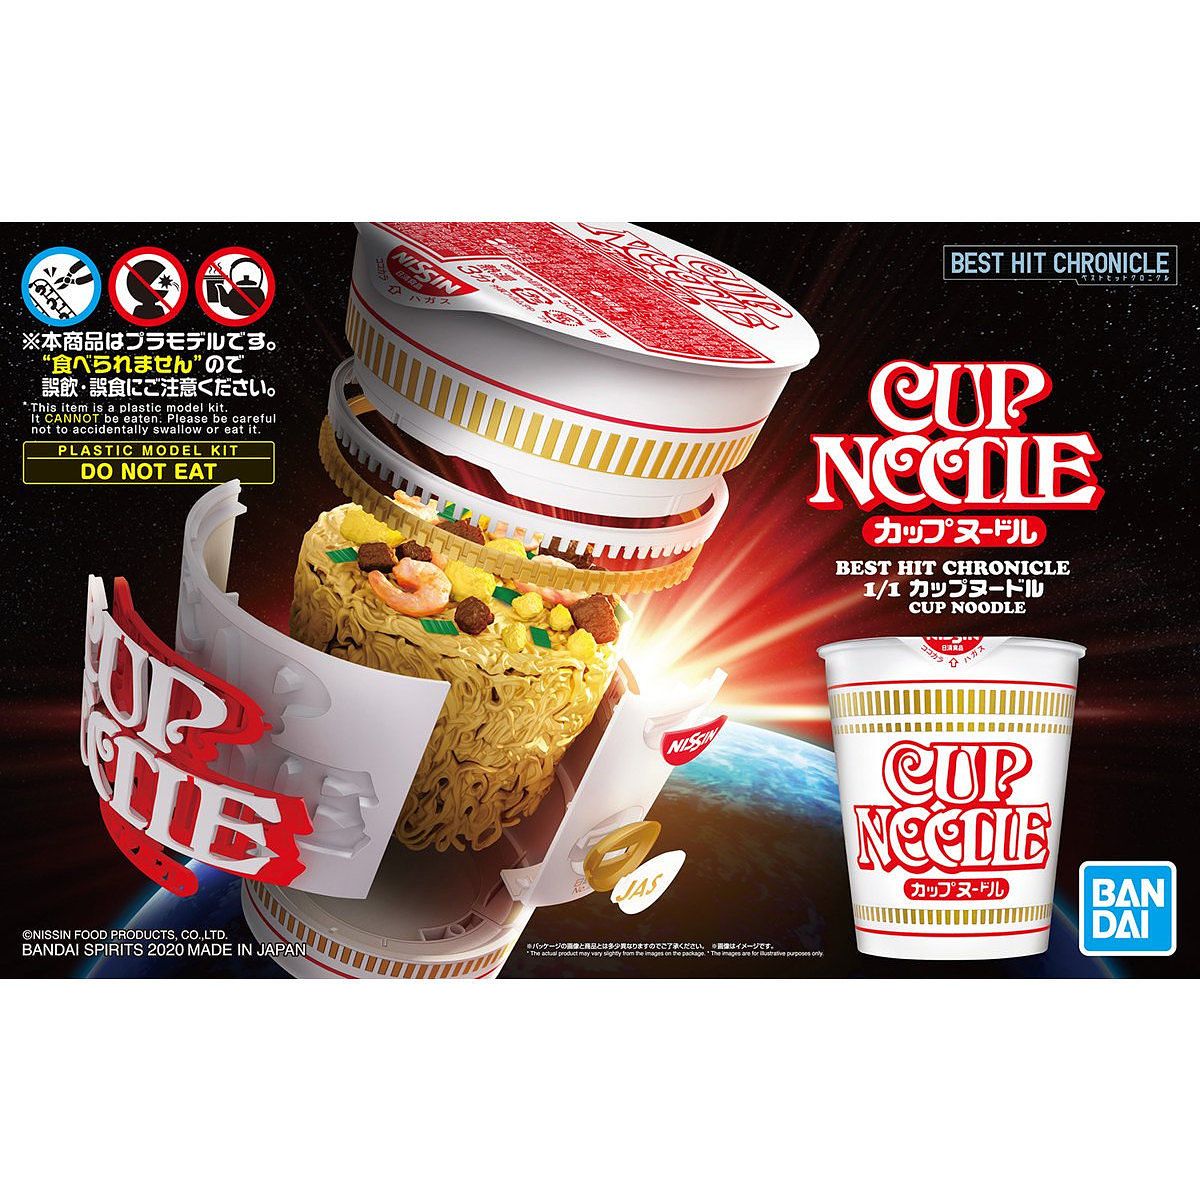 Bandai 1/1 Scale Best Hit Chronicle Cup Noodle Model Kit